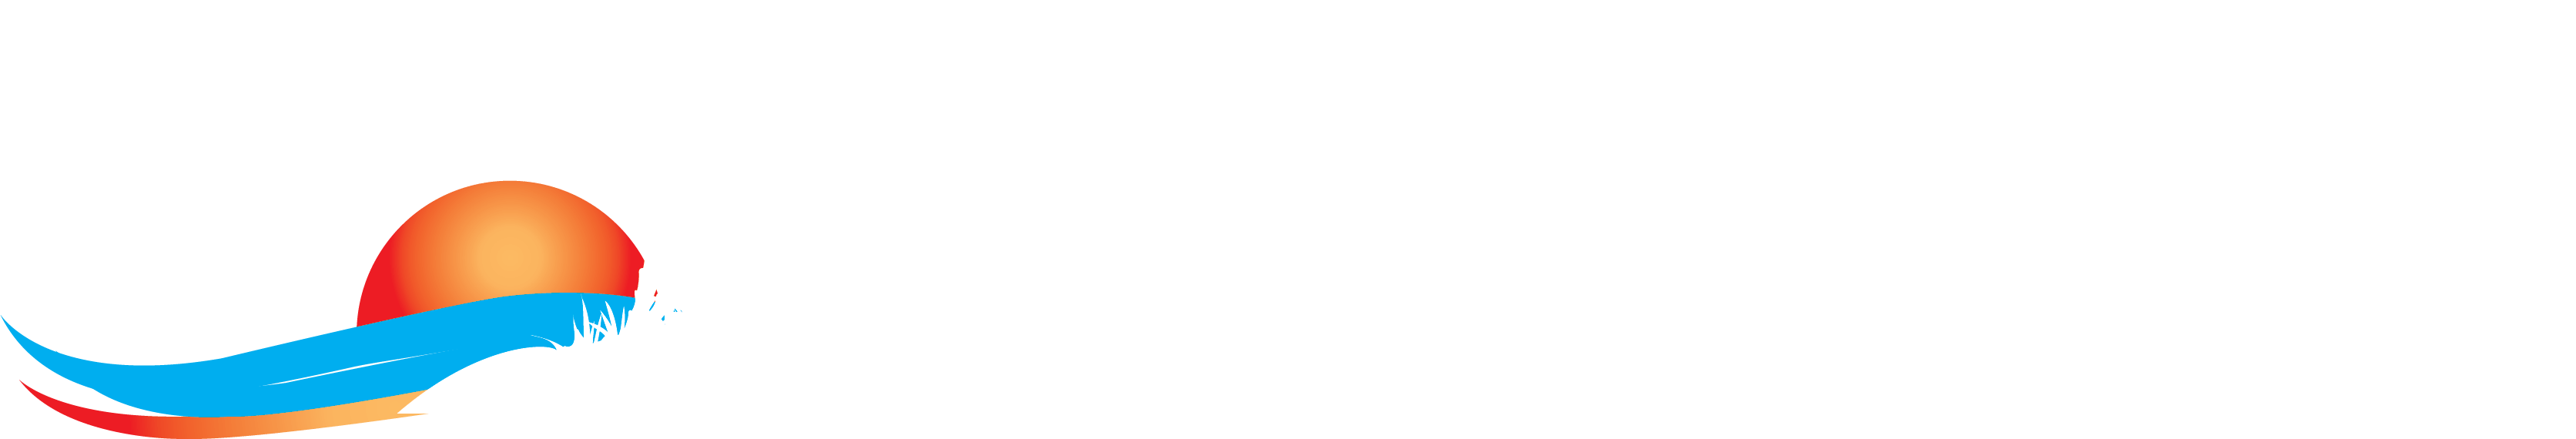 Tropic Seas Spas Logo in White and Color